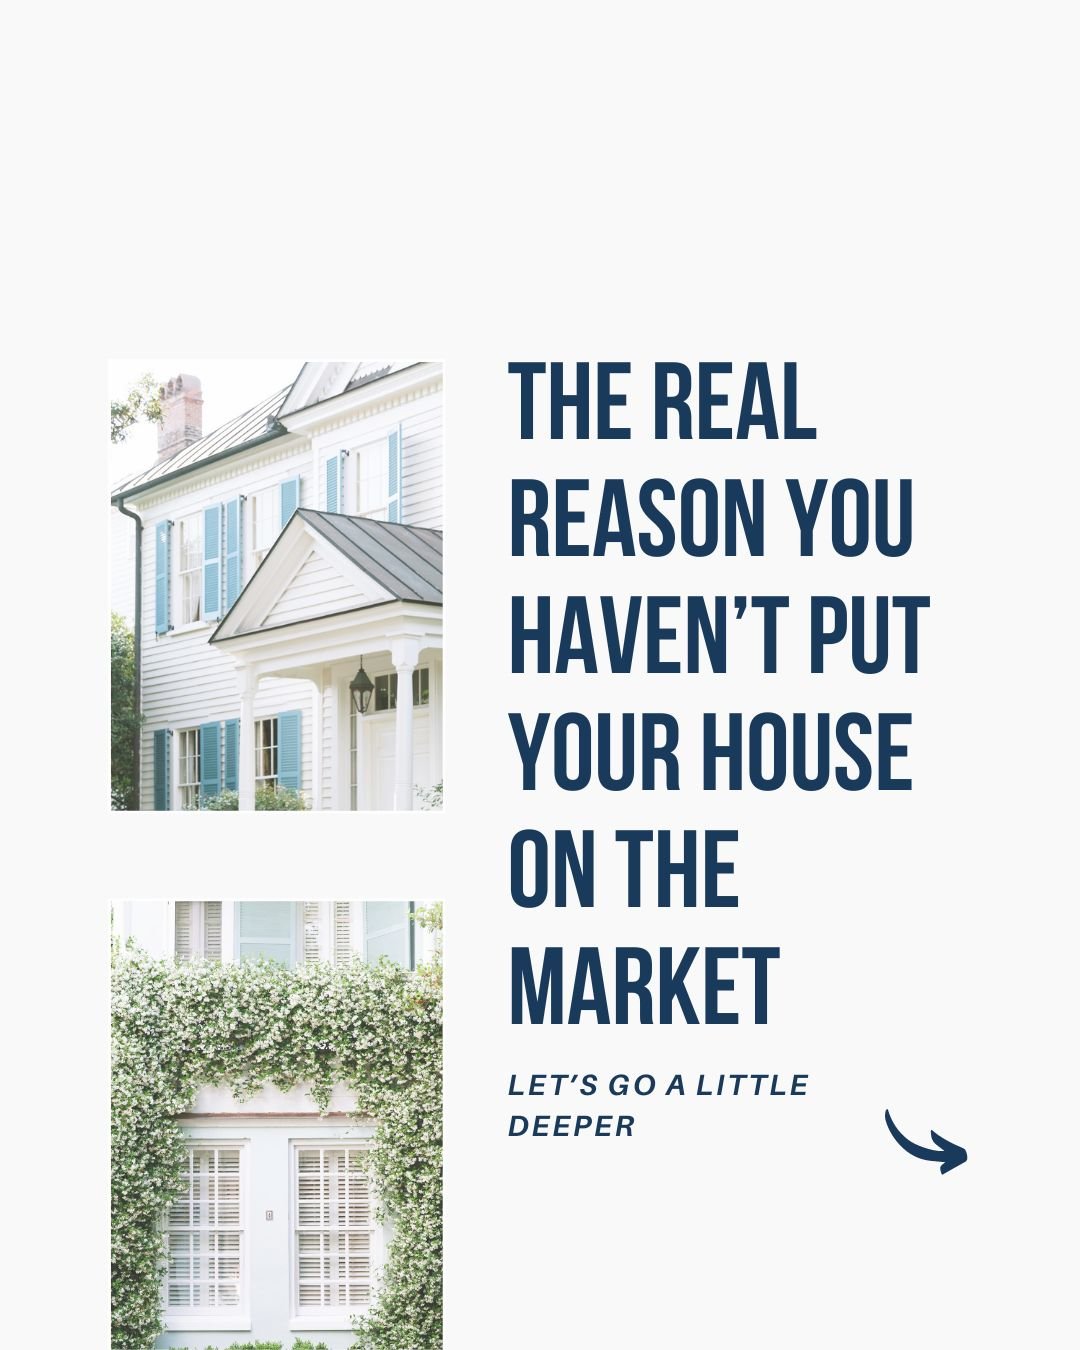 Homeowners, is this you? Then let&rsquo;s go a little deeper. 

It&rsquo;s easy to make excuses for why it isn&rsquo;t the right time to put your home on the market, even if you think you want to sell. 

But if we peel those excuses away, we can get 